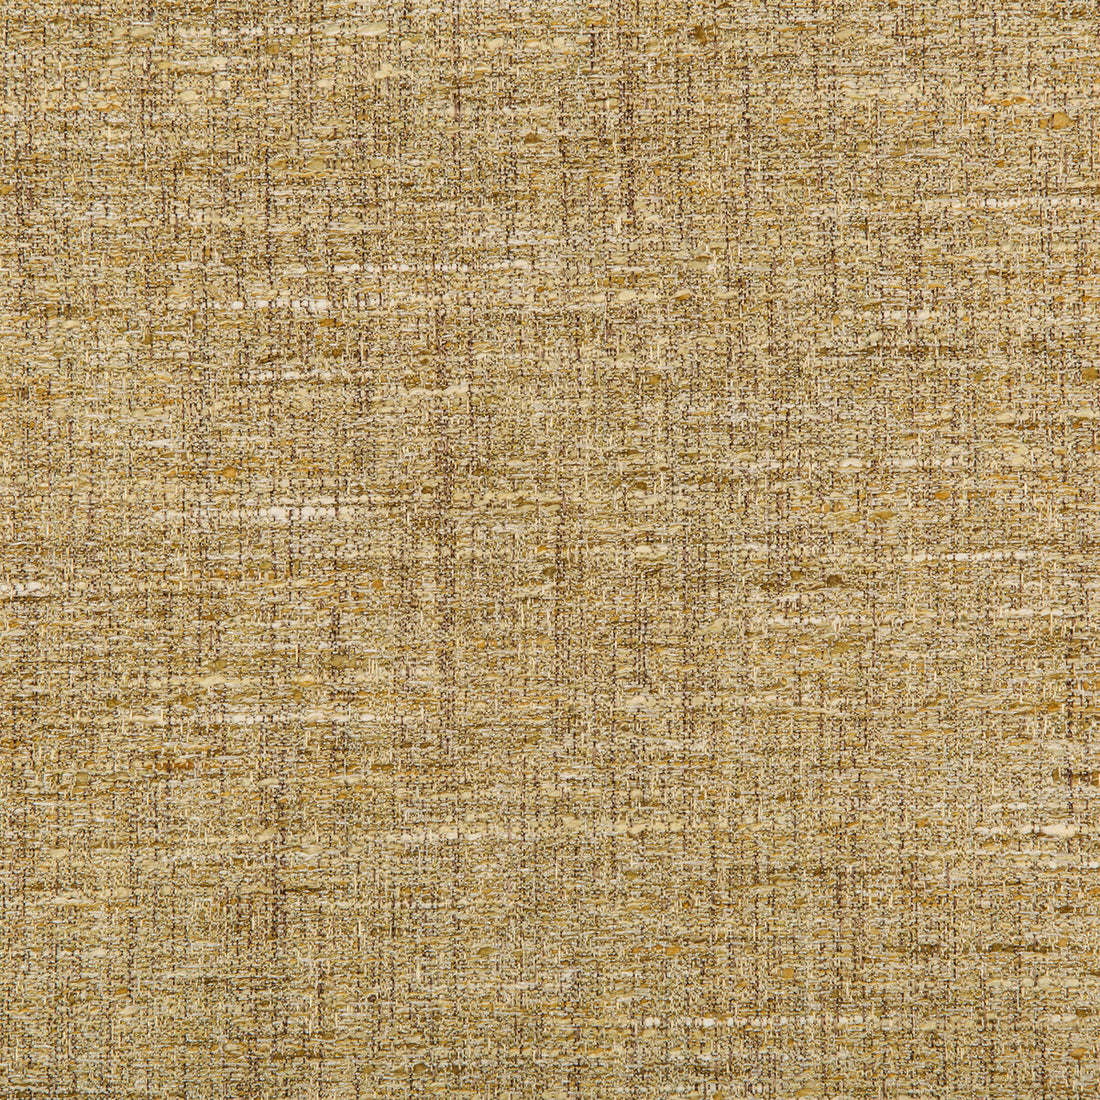 Kravet Contract fabric in 4647-416 color - pattern 4647.416.0 - by Kravet Contract